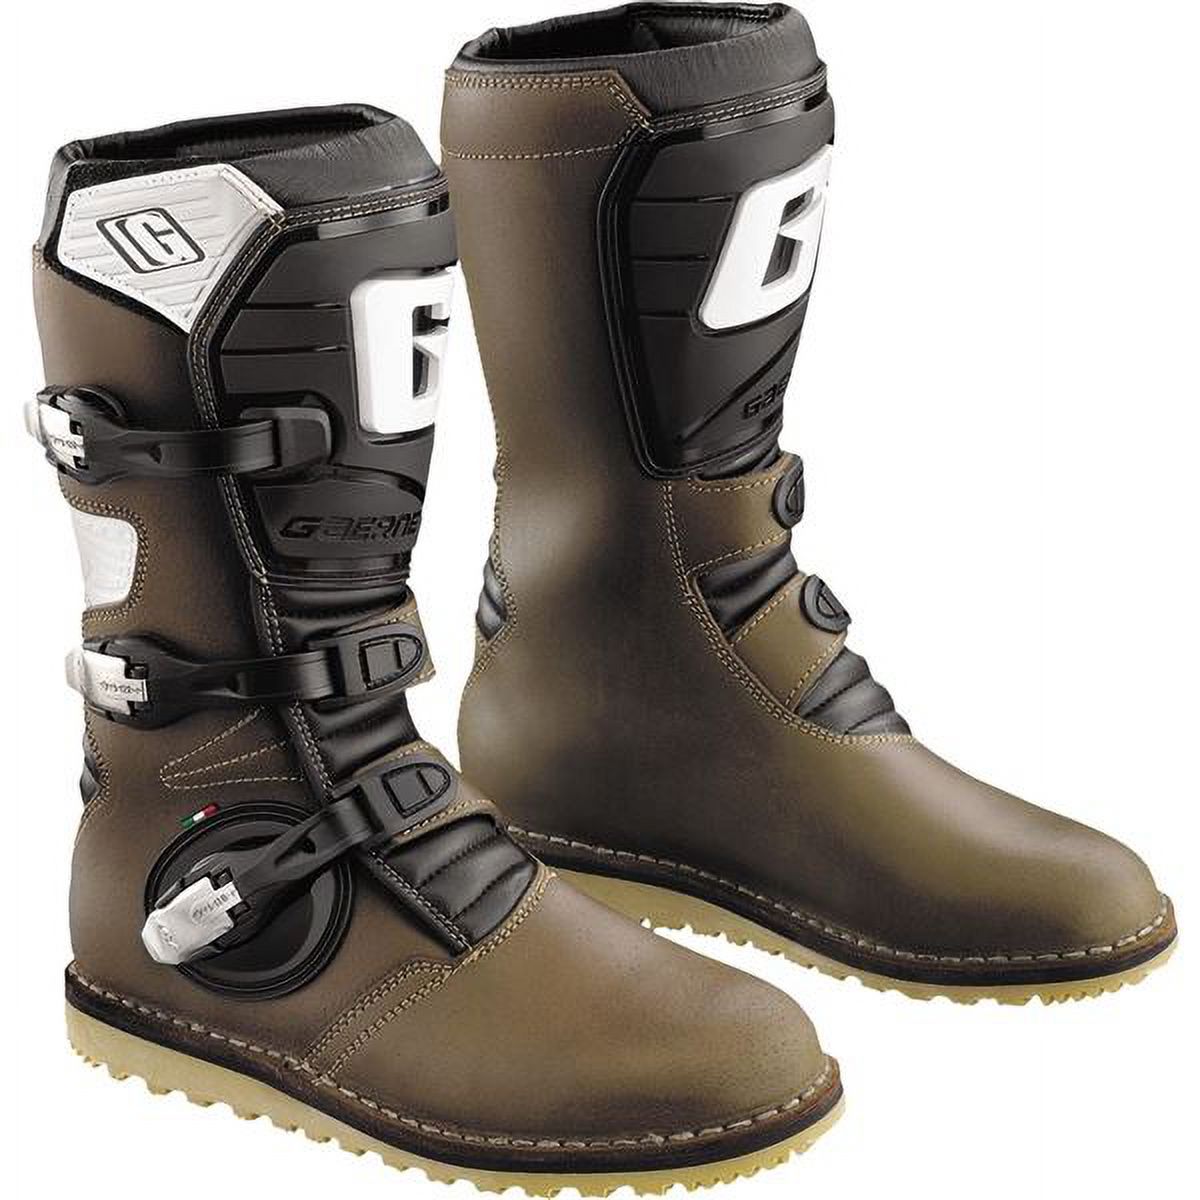 Gaerne Balance Pro-Tech Boots (8, Brown) - image 1 of 2